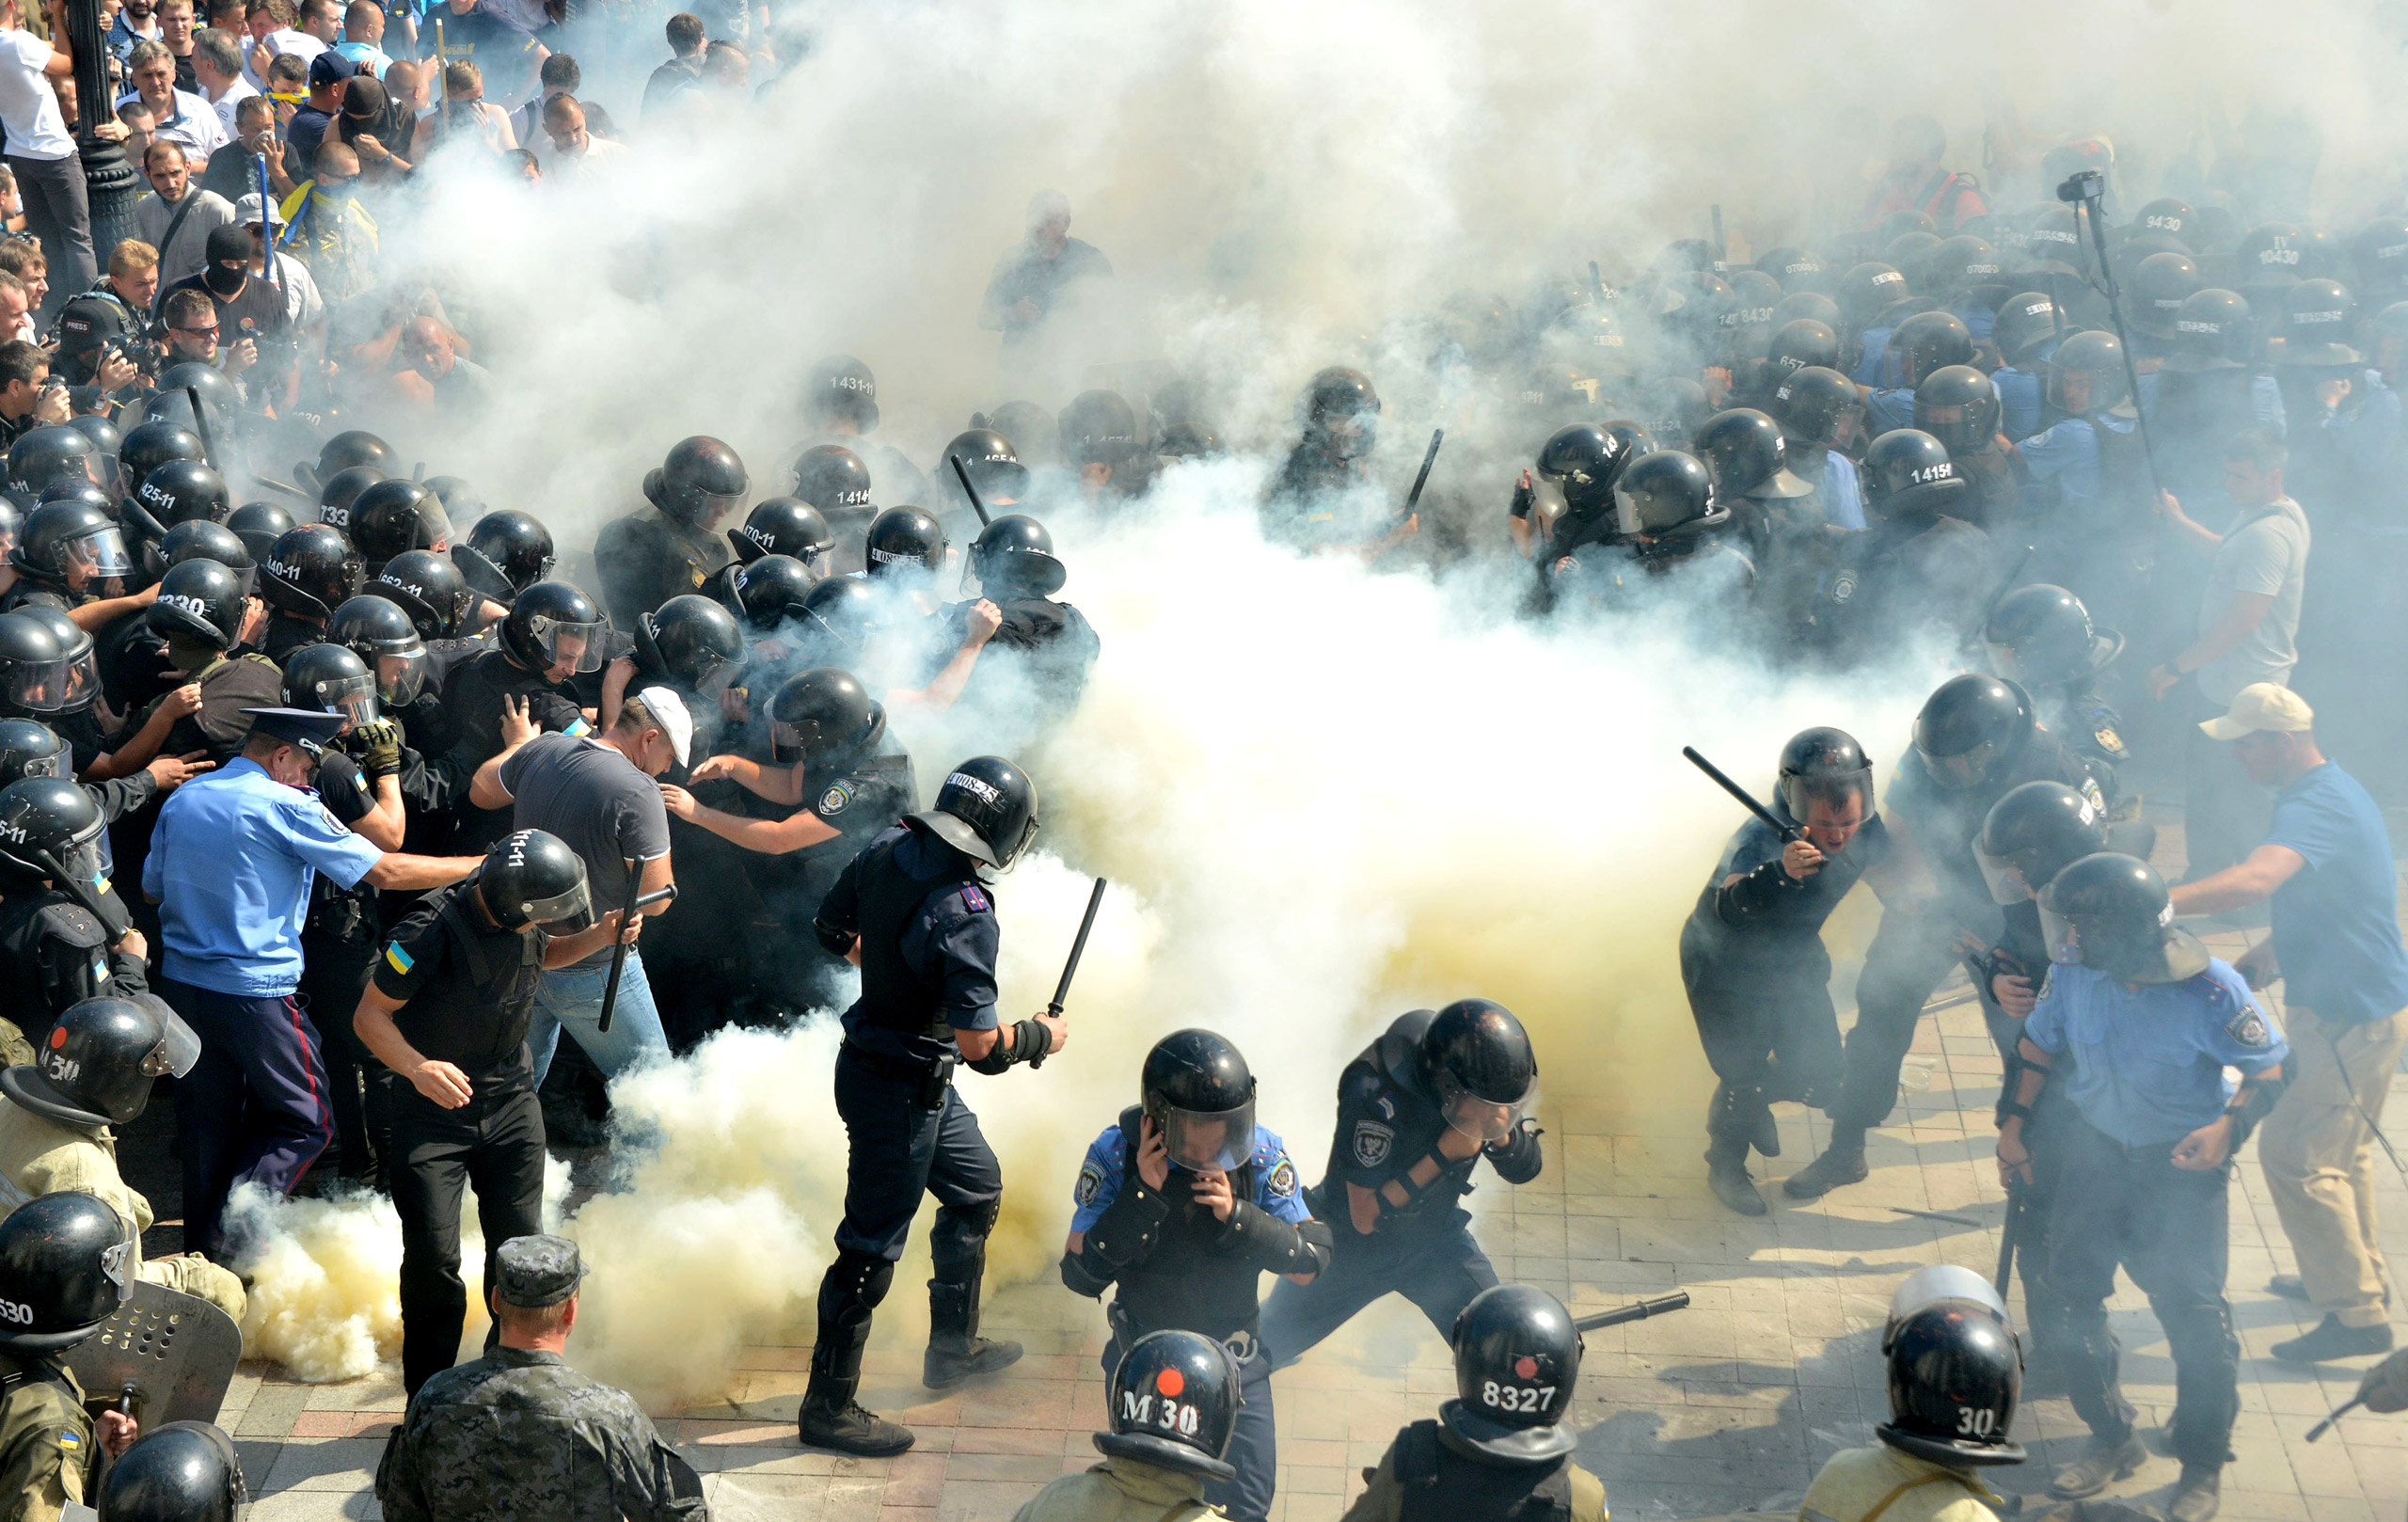 Smoke rises near the parliament building in Kiev, Ukraine, as activists of radical Ukrainian parties, including the Ukrainian nationalist party Svoboda (Freedom), clash with police officers on Aug. 31, 2015.